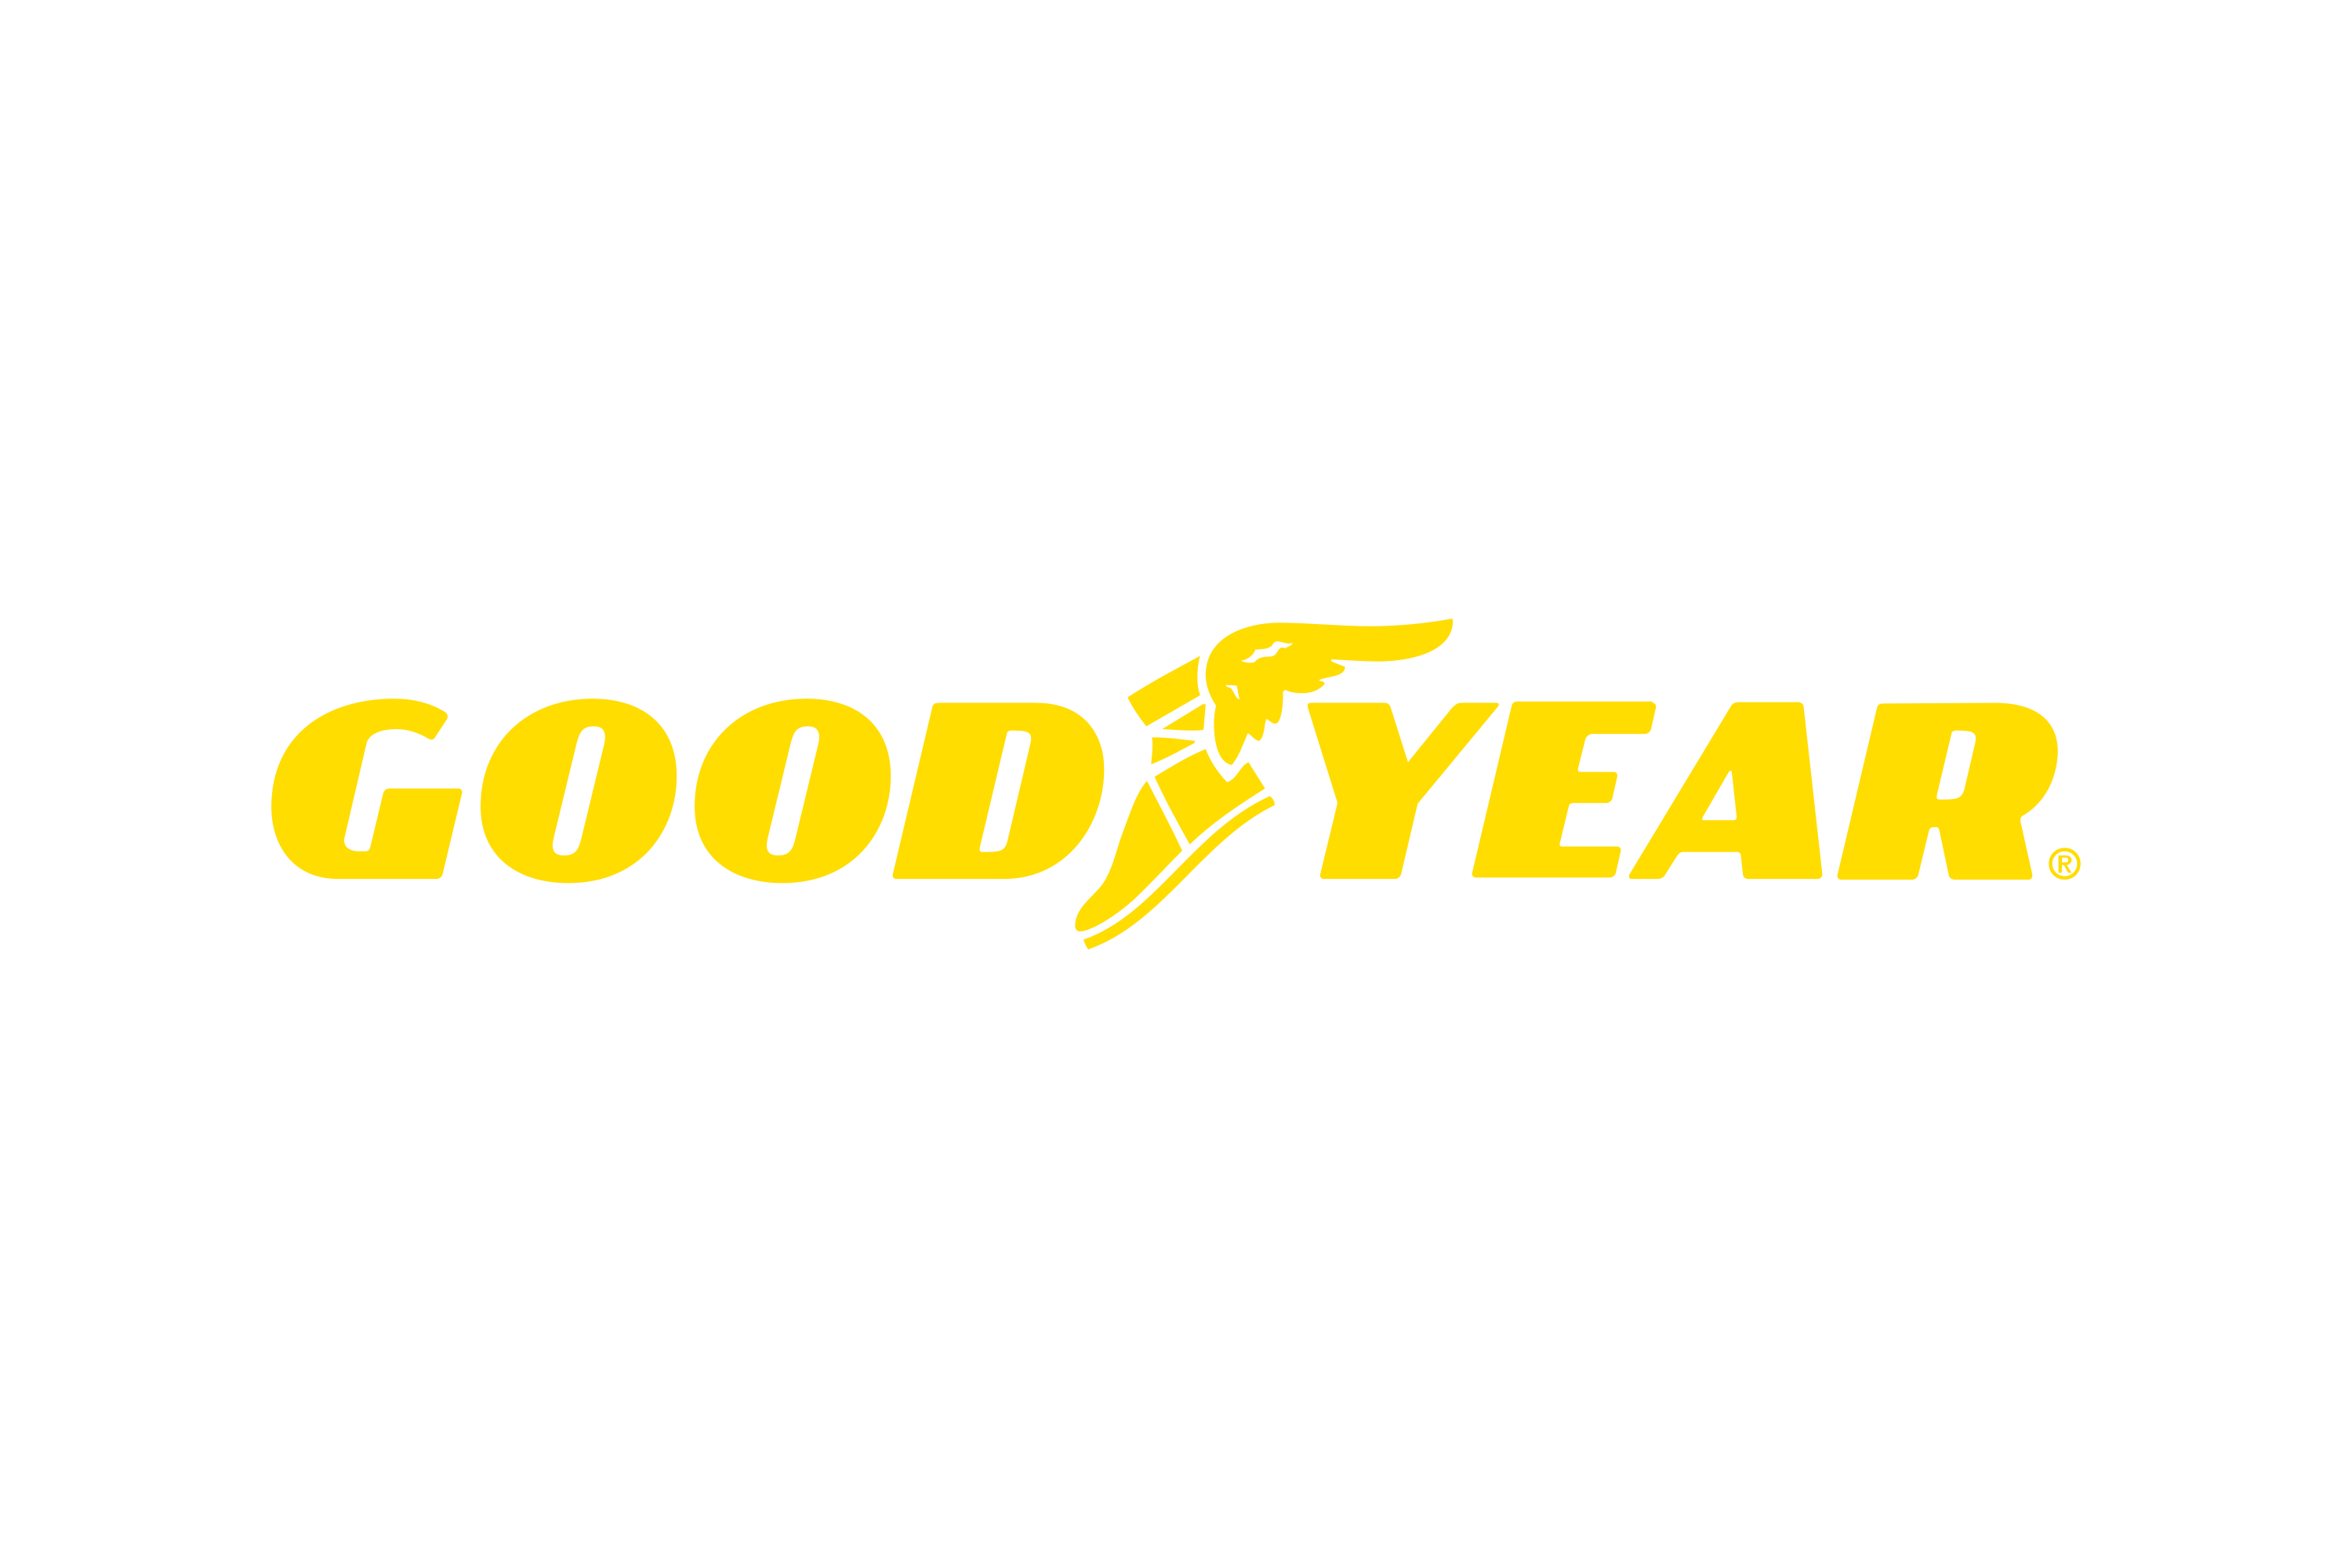 Download Goodyear Tire And Rubber Company Logo In Svg Vector Or Png File Format Logo Wine